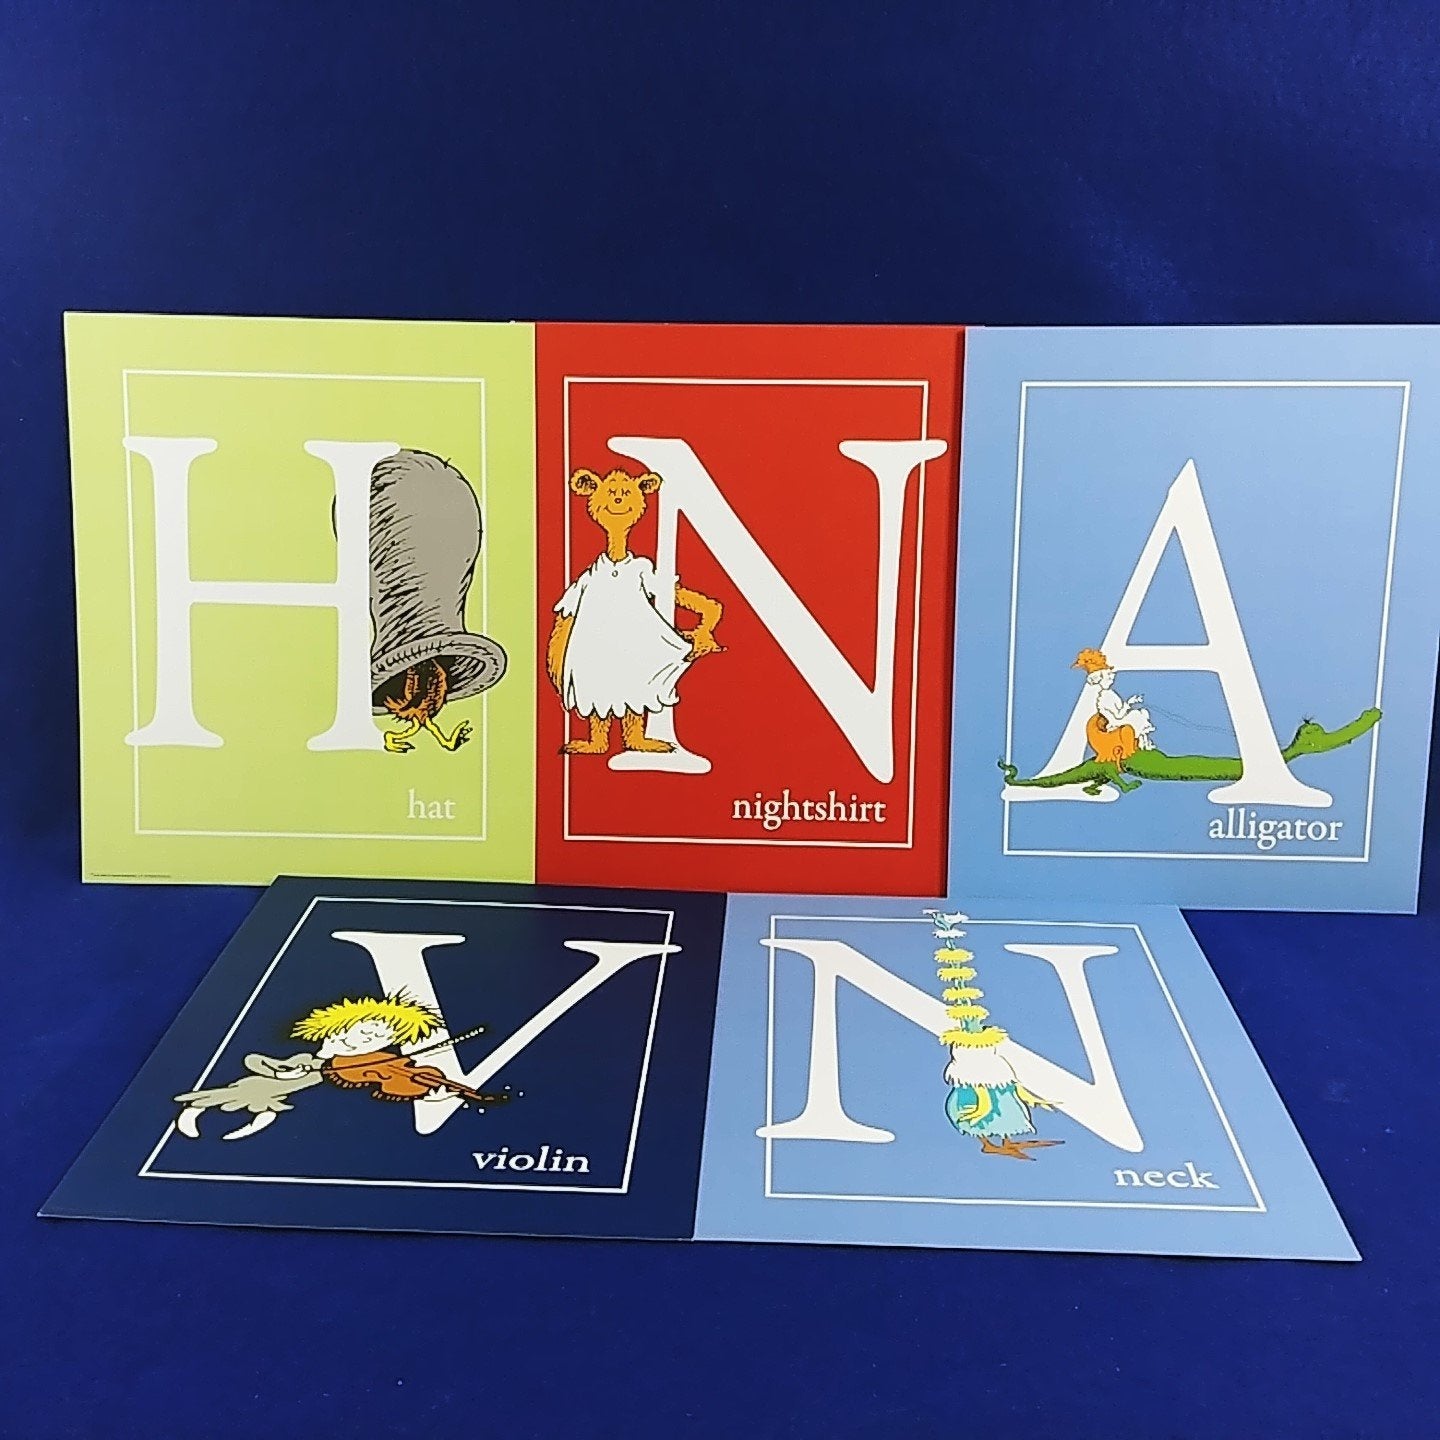 Dr. Suess Art Print Collection 5 pc set Letters H N V A N 2011